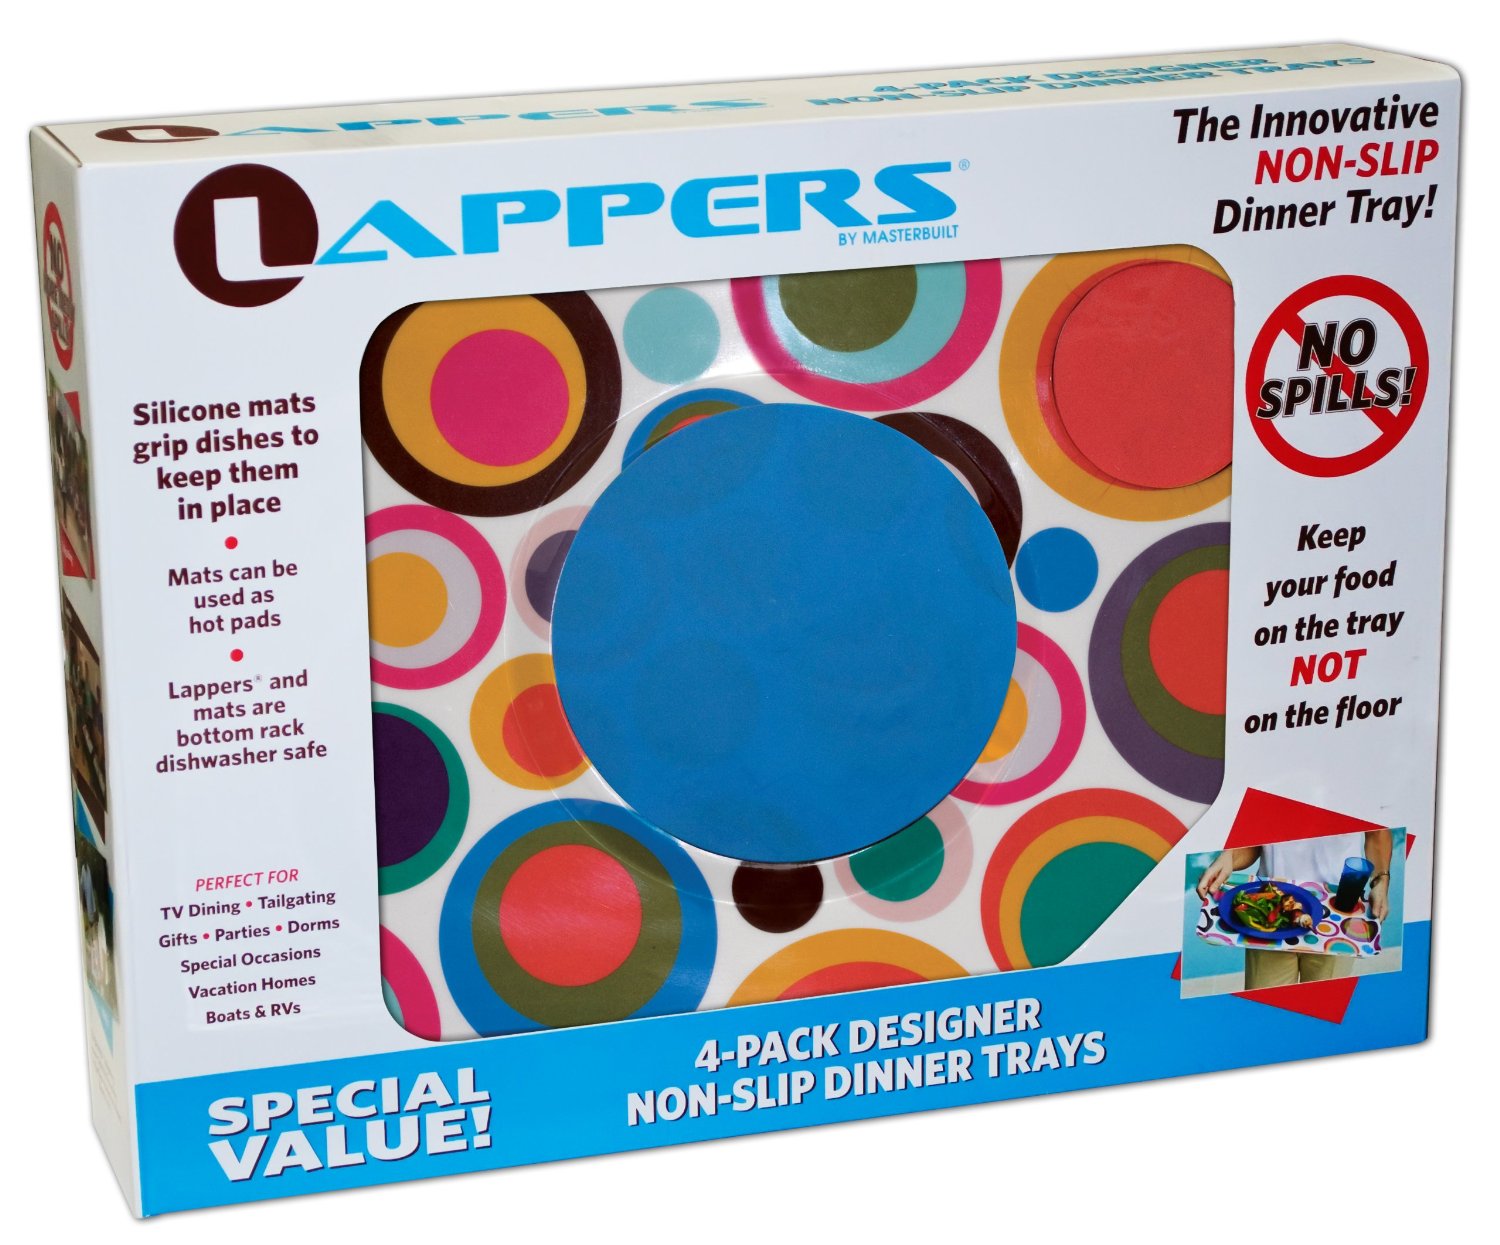 Lapper Trays with Circular Patterns Plus Non-Slip Plate and Cup Pads, 4 Trays Per Package